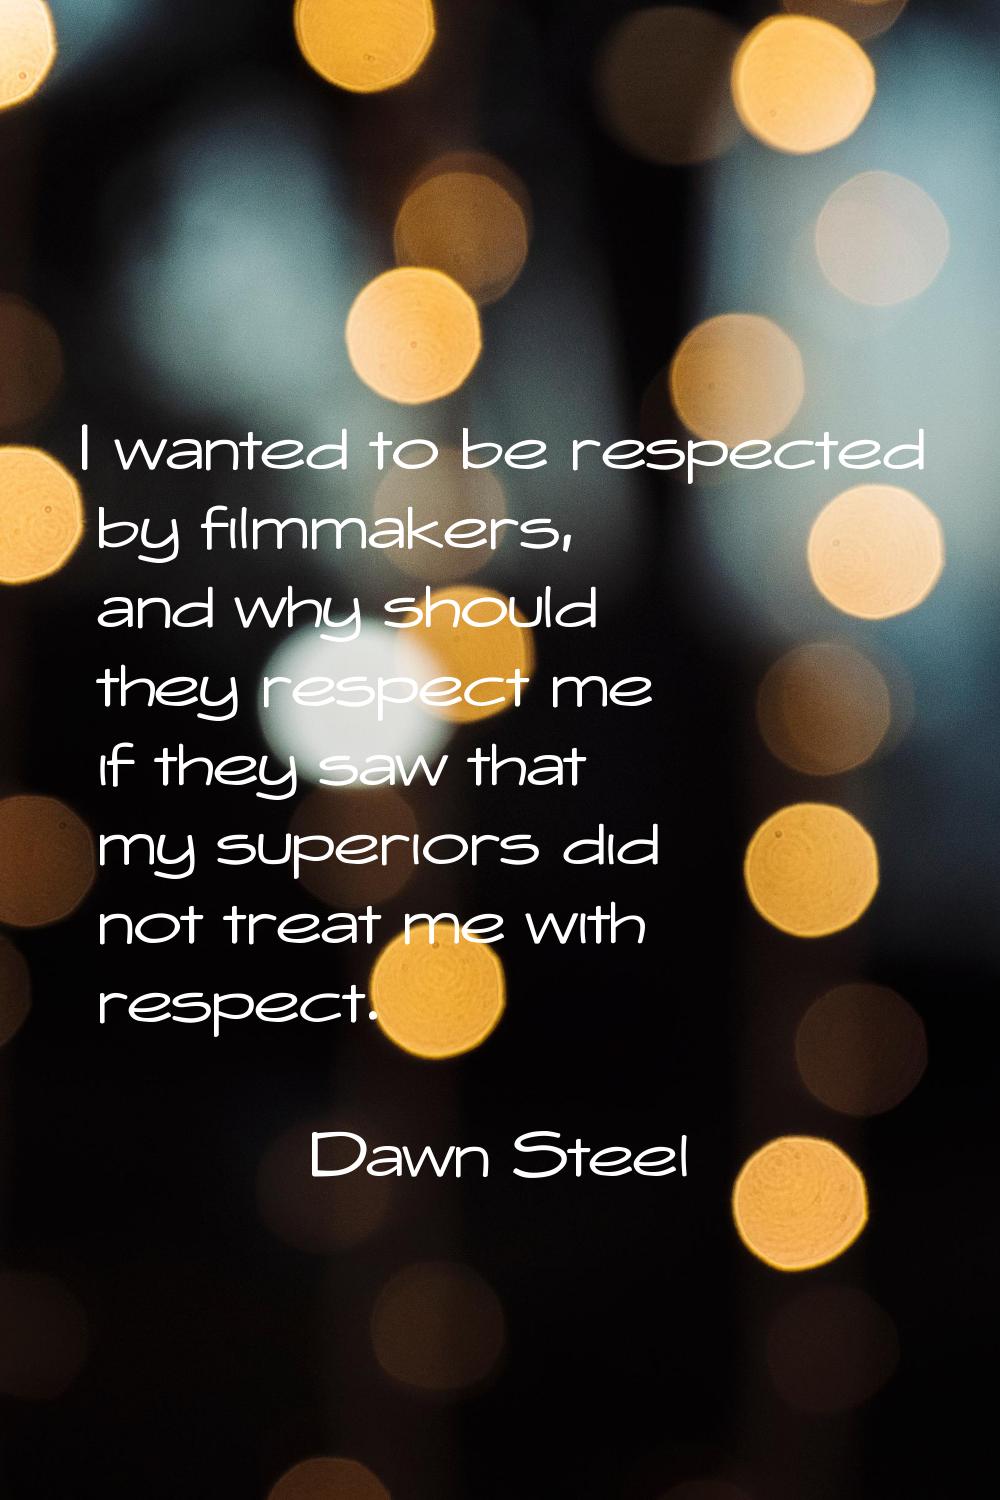 I wanted to be respected by filmmakers, and why should they respect me if they saw that my superior